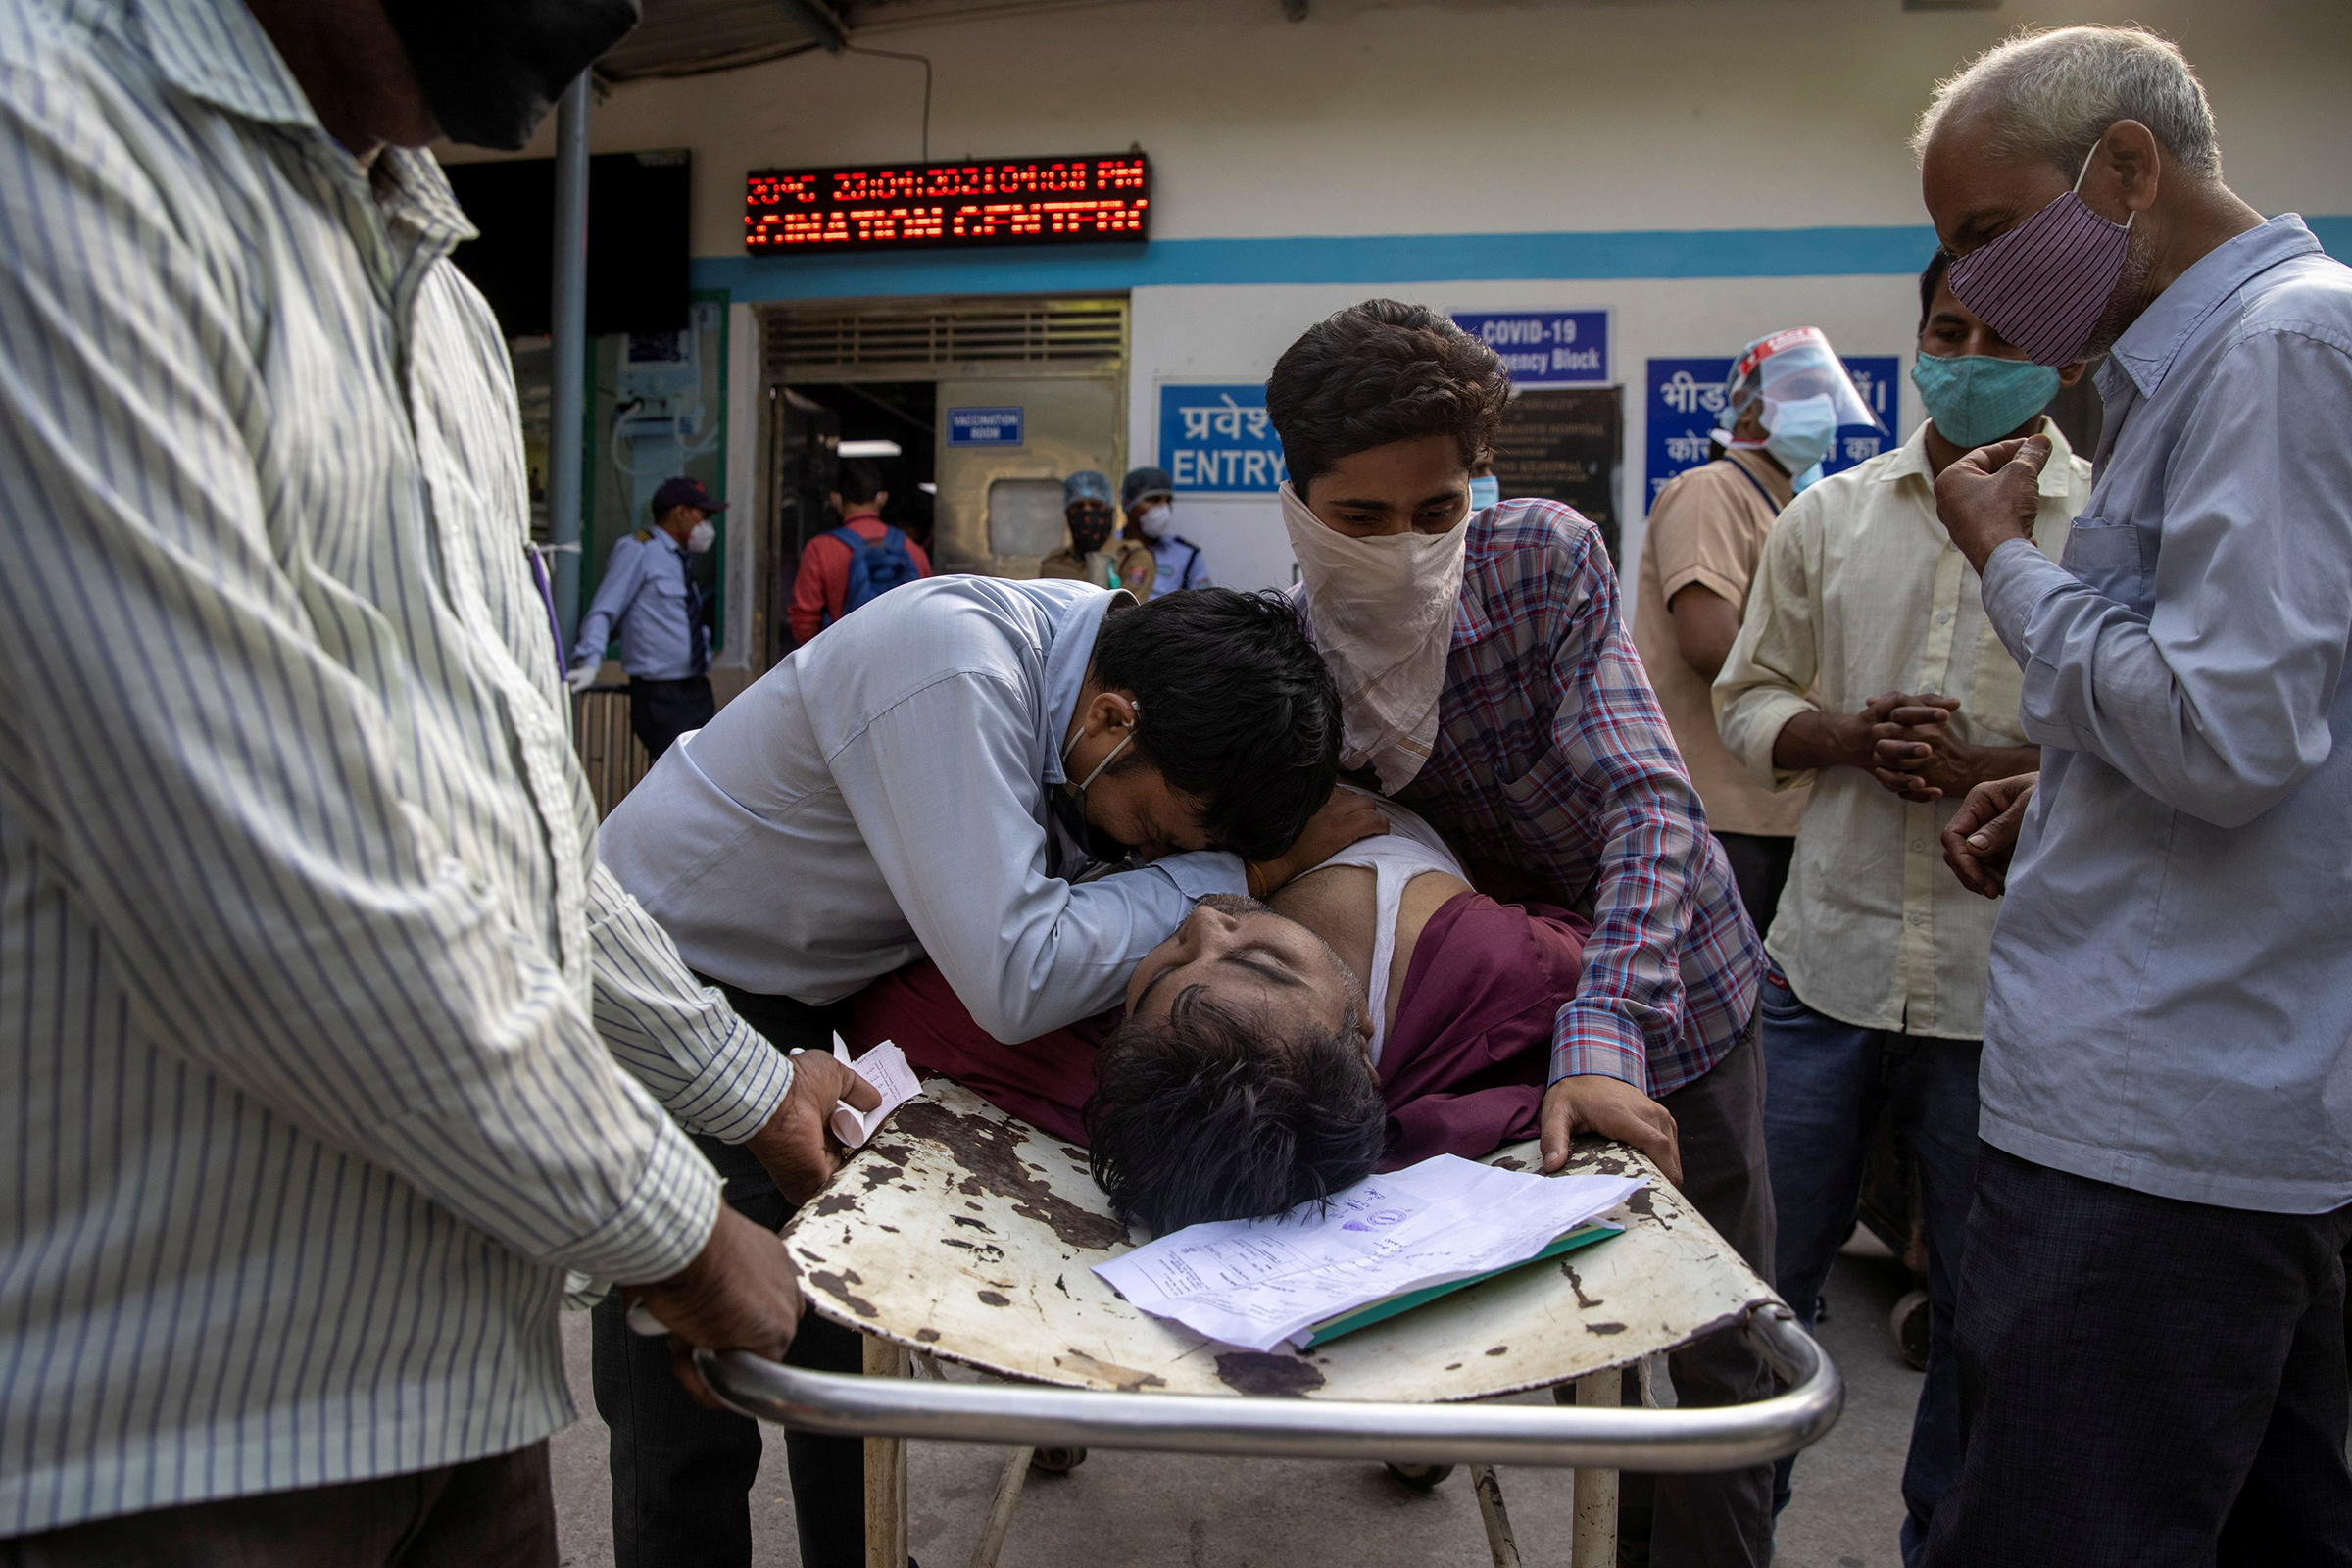 Family members mourn after Shayam Narayan is declared dead outside the COVID-19 casualty ward at Guru Teg Bahadur Hospital in New Delhi on April 23.